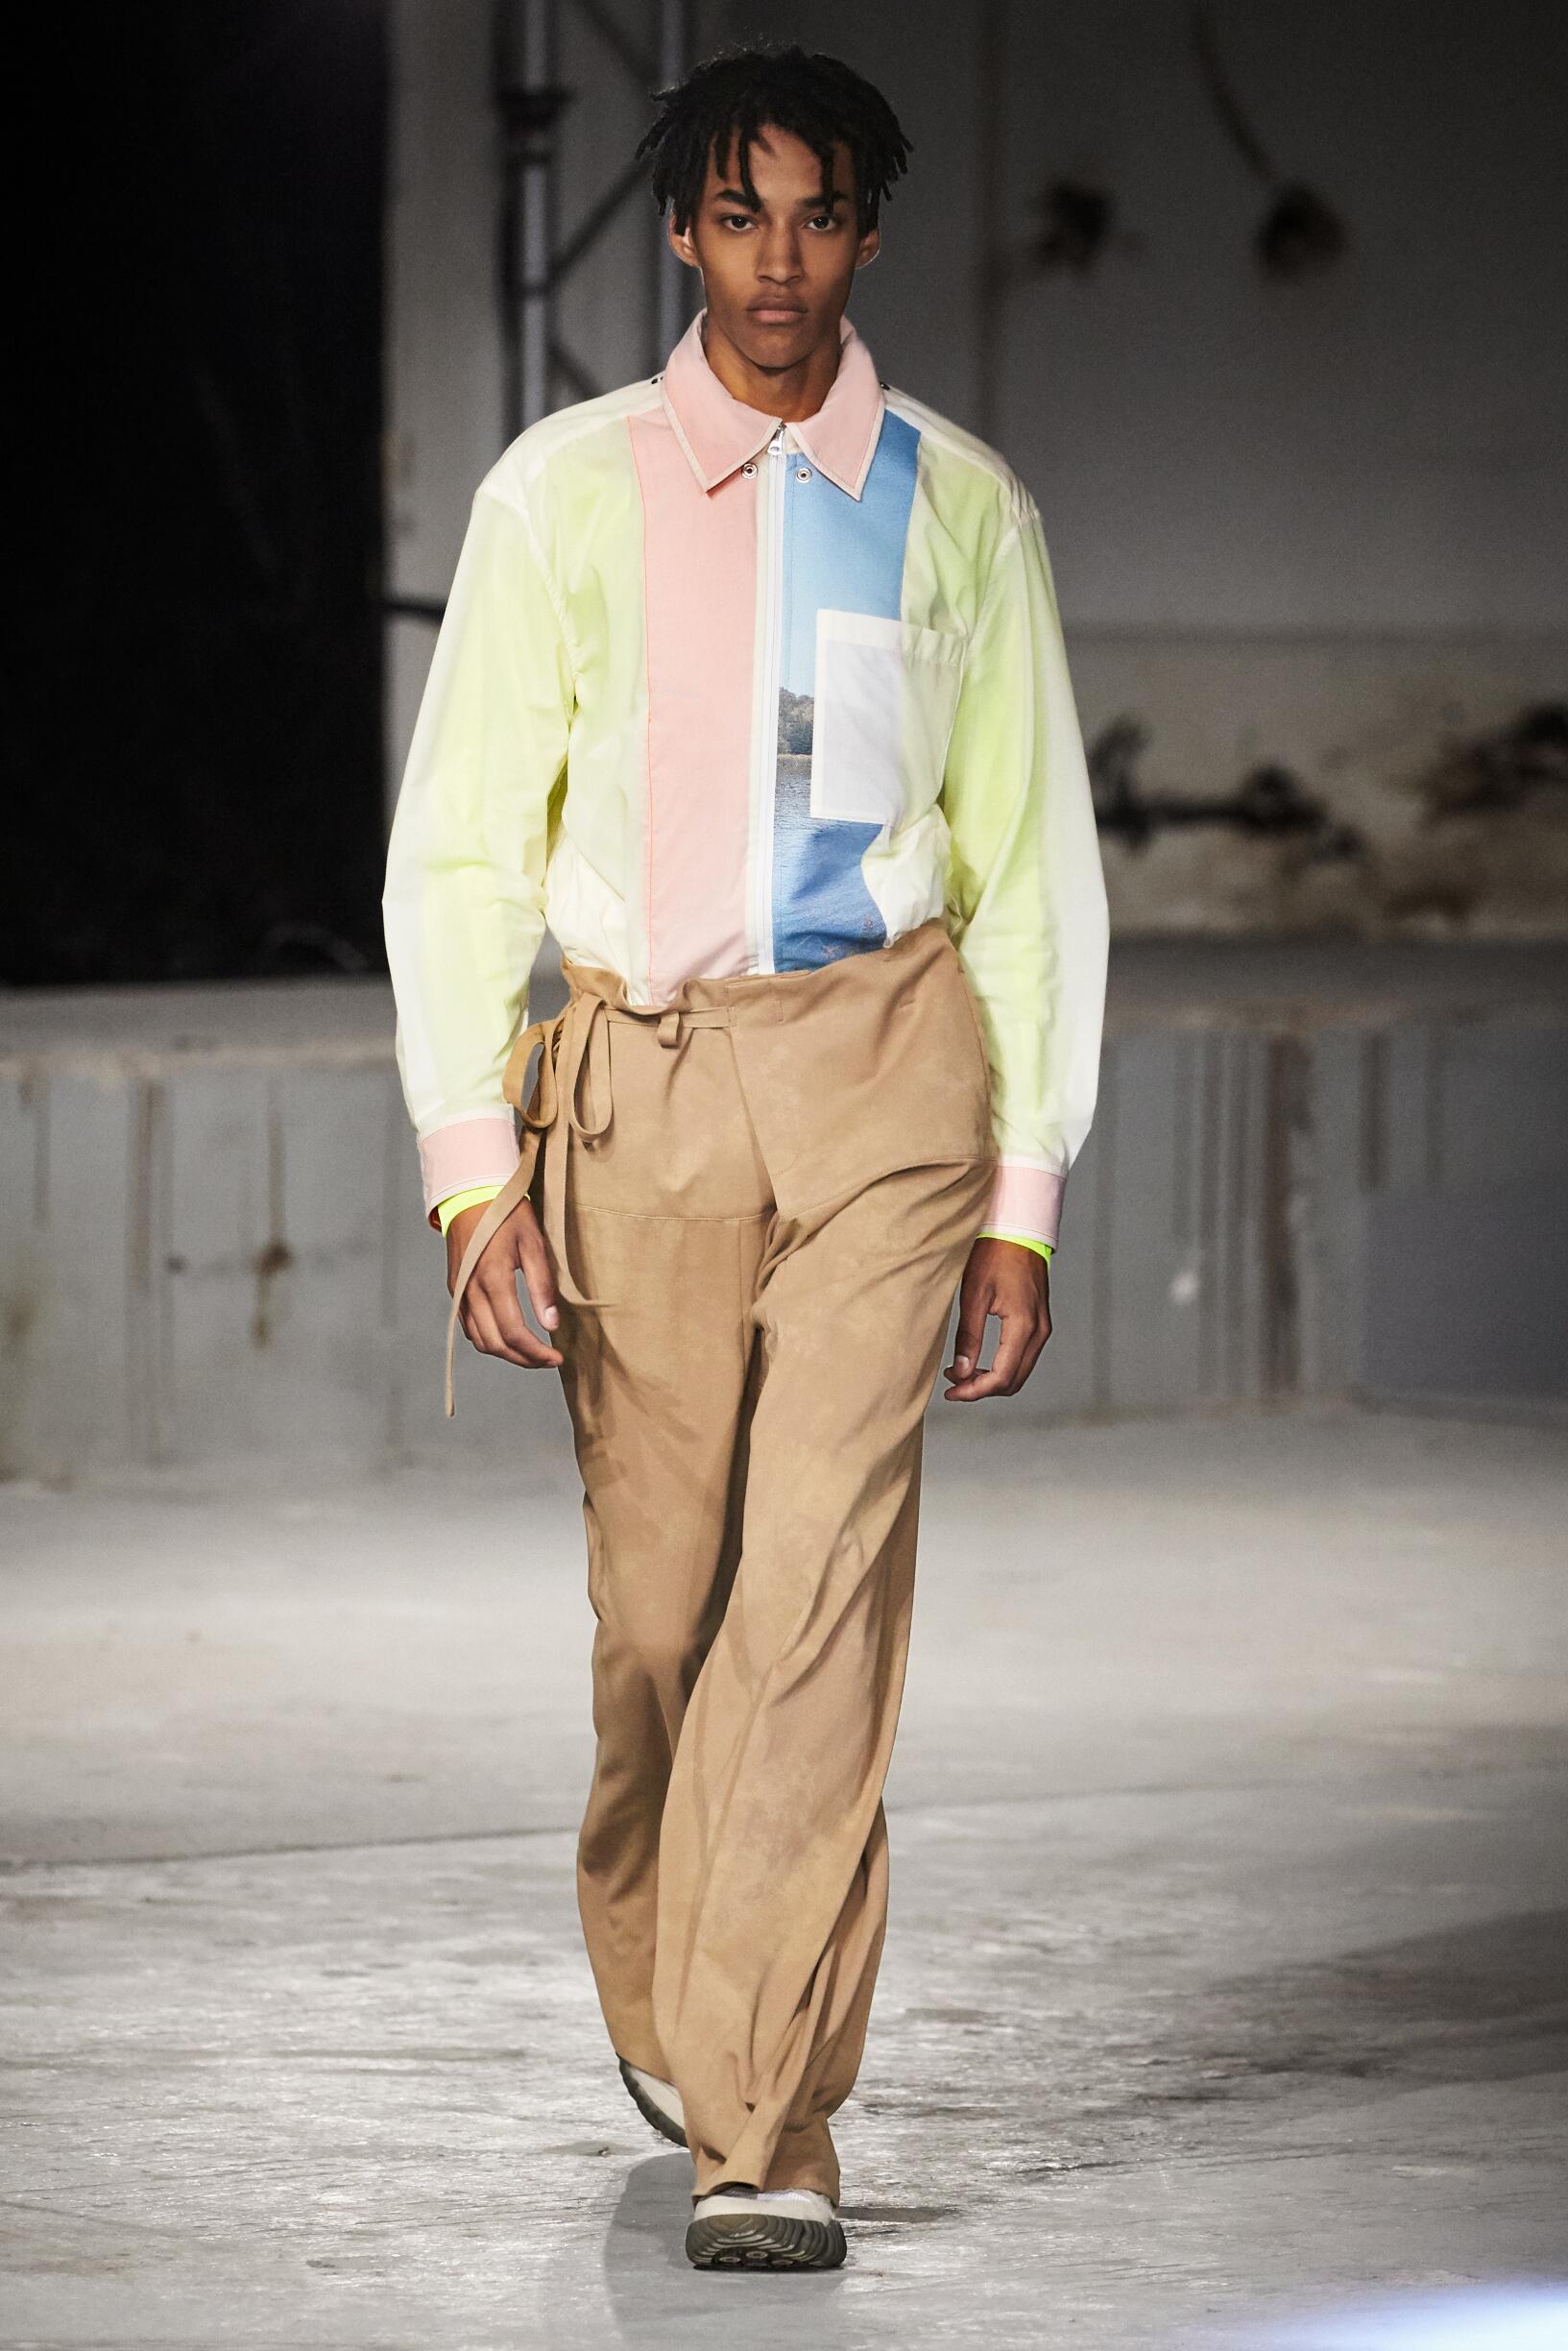 ACNE STUDIOS SPRING SUMMER 2019 MEN’S COLLECTION | The Skinny Beep